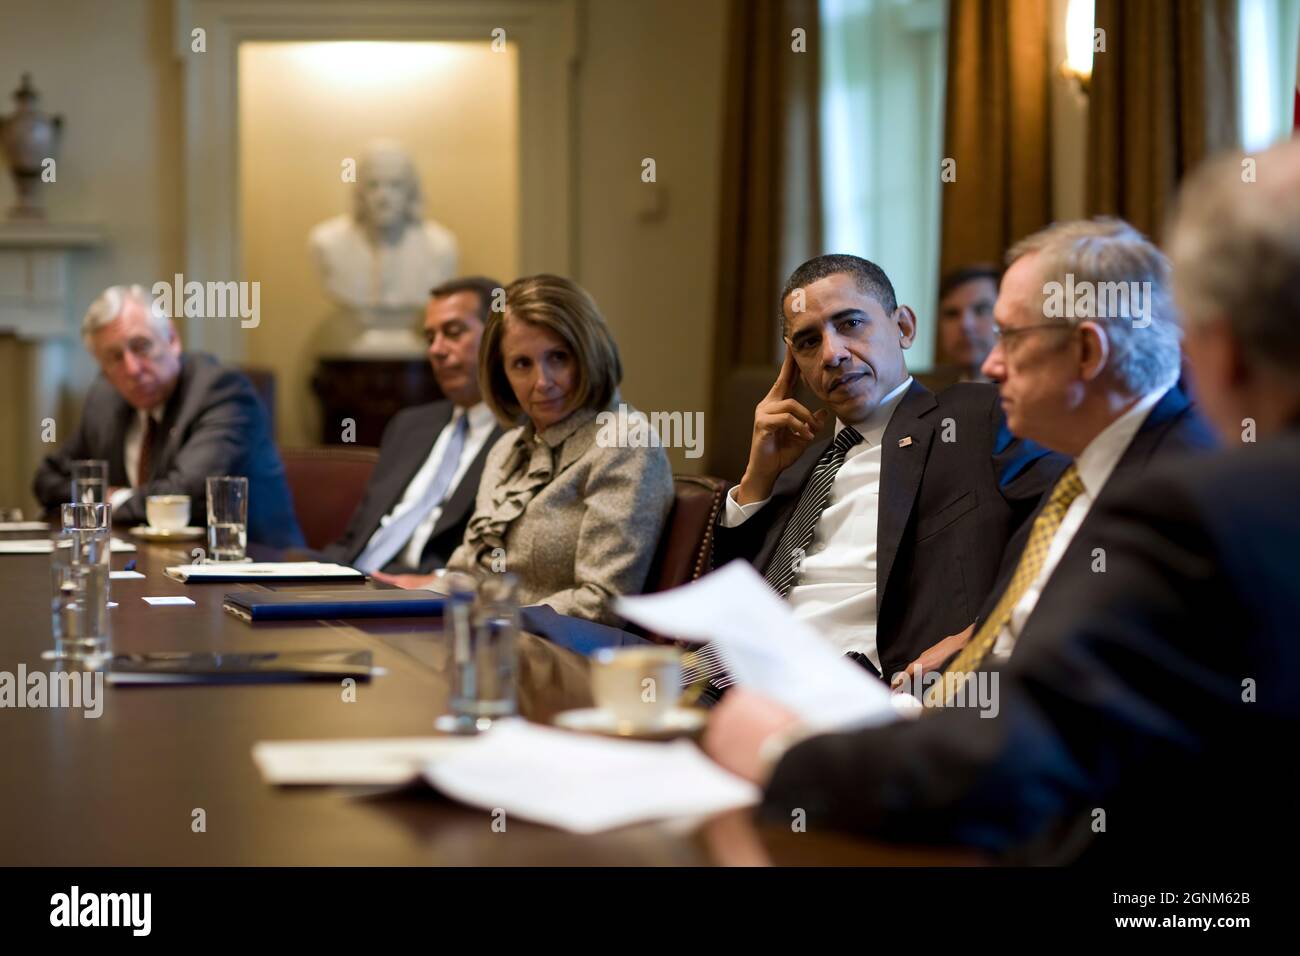 President Barack Obama meets with bipartisan leaders of the House and Senate, including from left, House Majority Leader Steny Hoyer, D-Md., House Republican Leader John A. Boehner, R-Ohio, Speaker of the House Nancy Pelosi, D-Calif., Senate Majority Leader Harry Reid, D-Nev., and Senate Republican Leader Mitch McConnell, R-Ky., to discuss Wall Street reform, in the Cabinet Room of the White House, April 14, 2010. (Official White House Photo by Pete Souza) This official White House photograph is being made available only for publication by news organizations and/or for personal use printing by Stock Photo